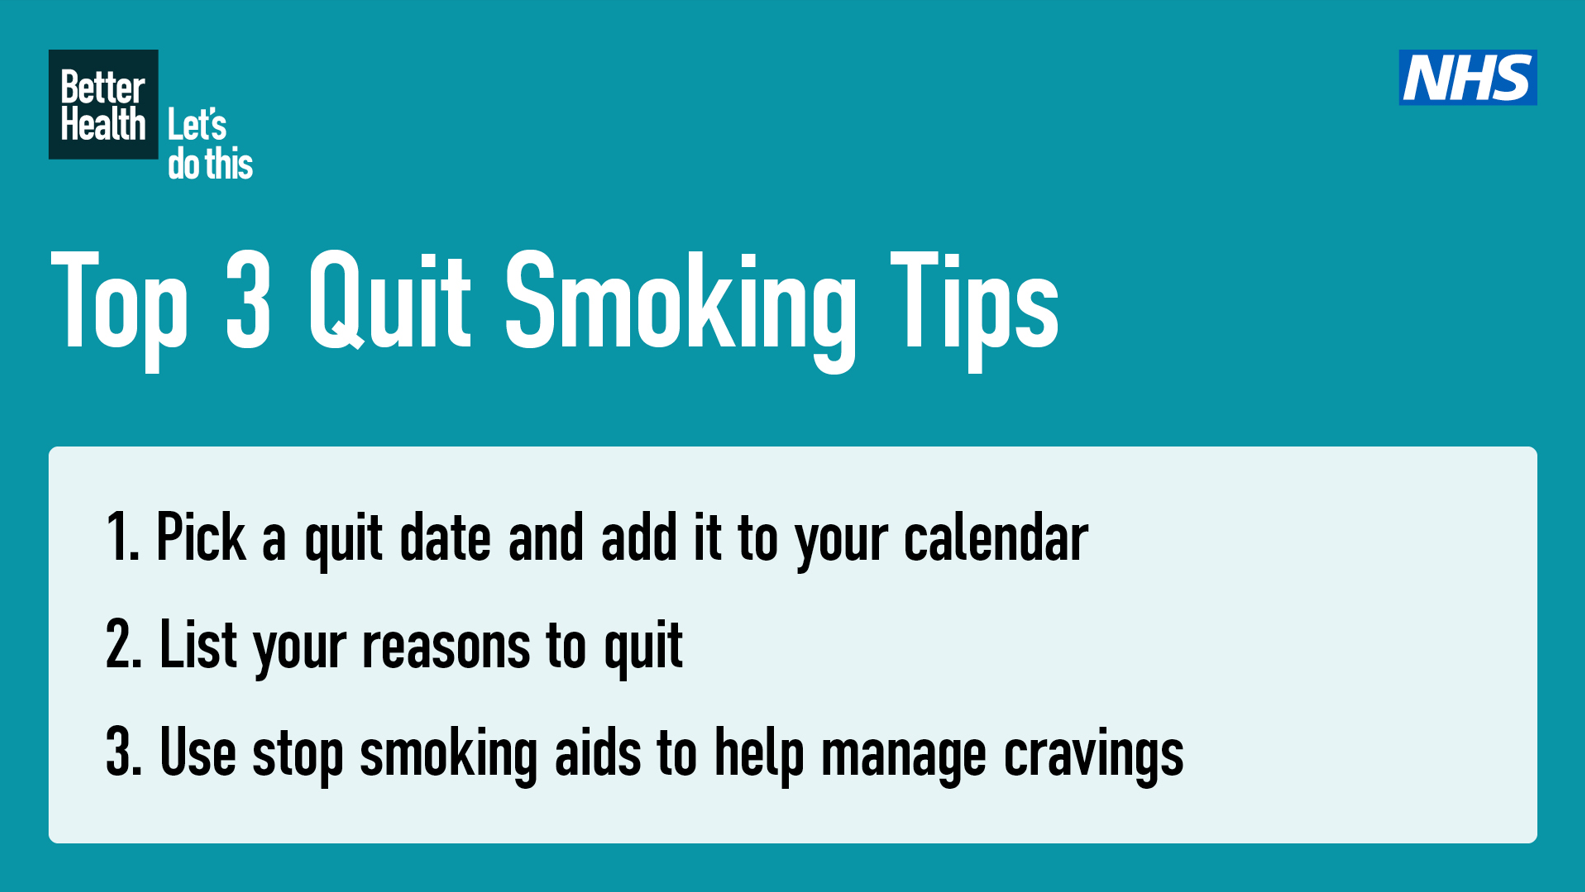 Image quoting the top three tips for quitting smoking being. 1. Pick a quit date and add it to your calendar. 2. List your reasons to quit. 3. Use stop smoking aids to help manage cravings. 